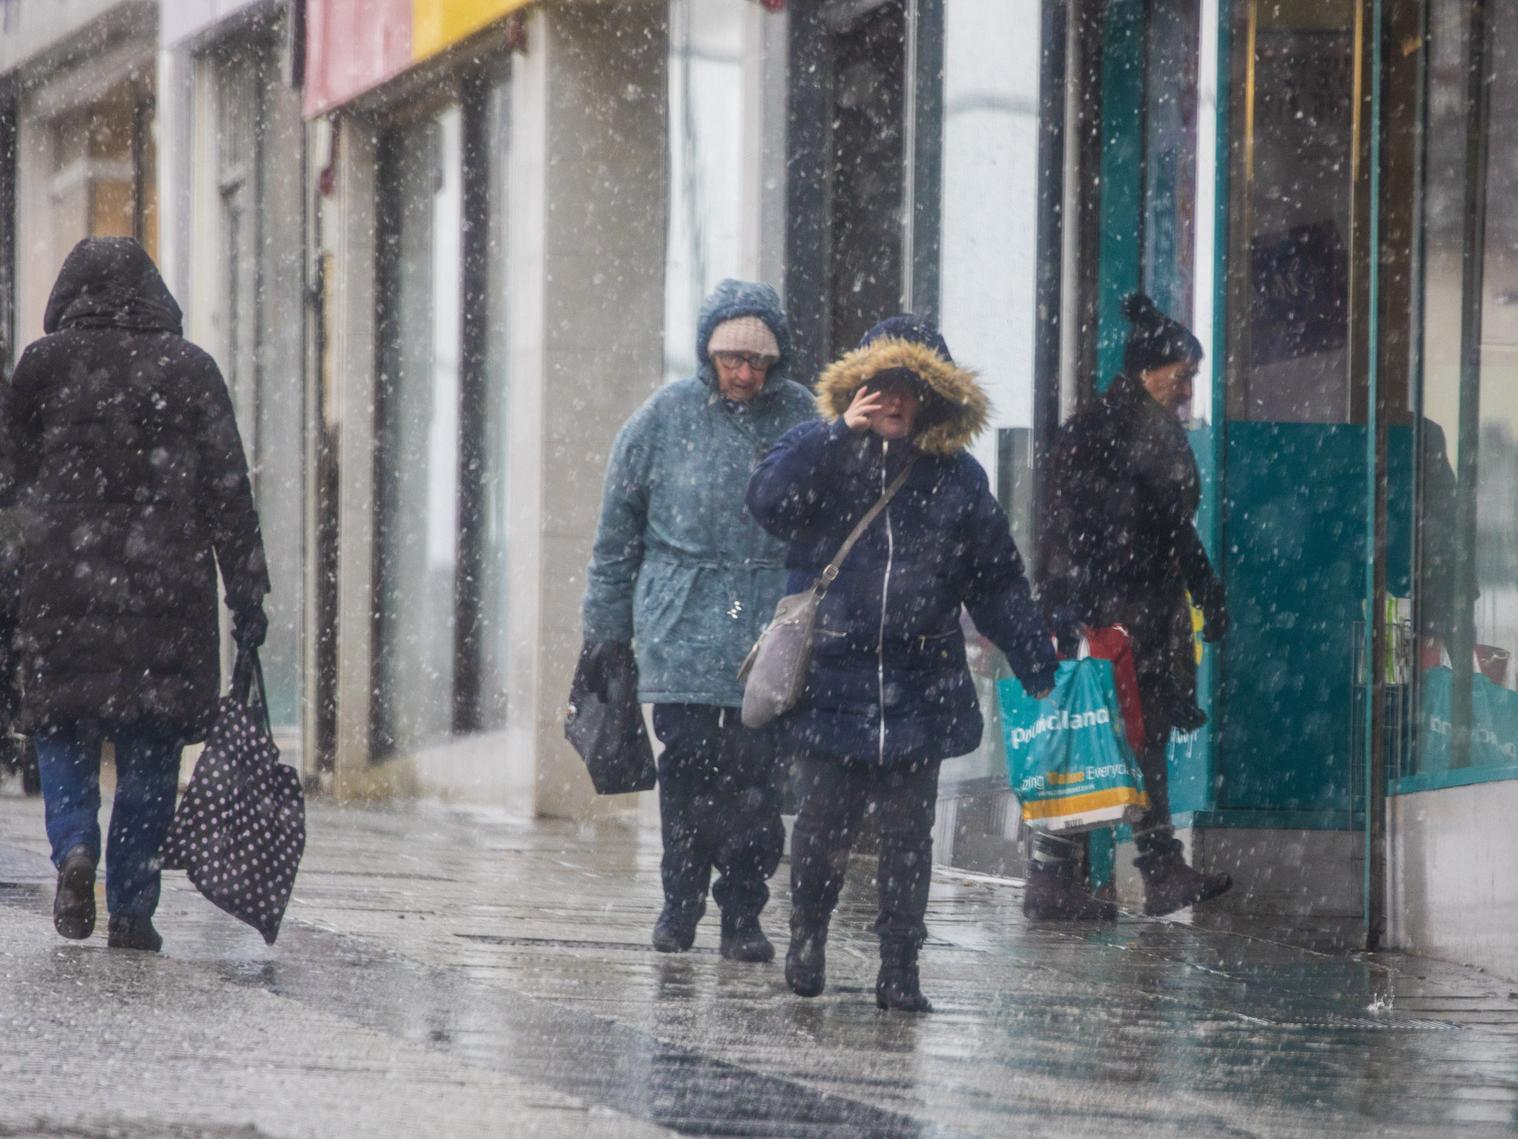 Shoppers felt the force of Storm Ciara on Monday. Pic: Katielee Arrowsmith/SWNS